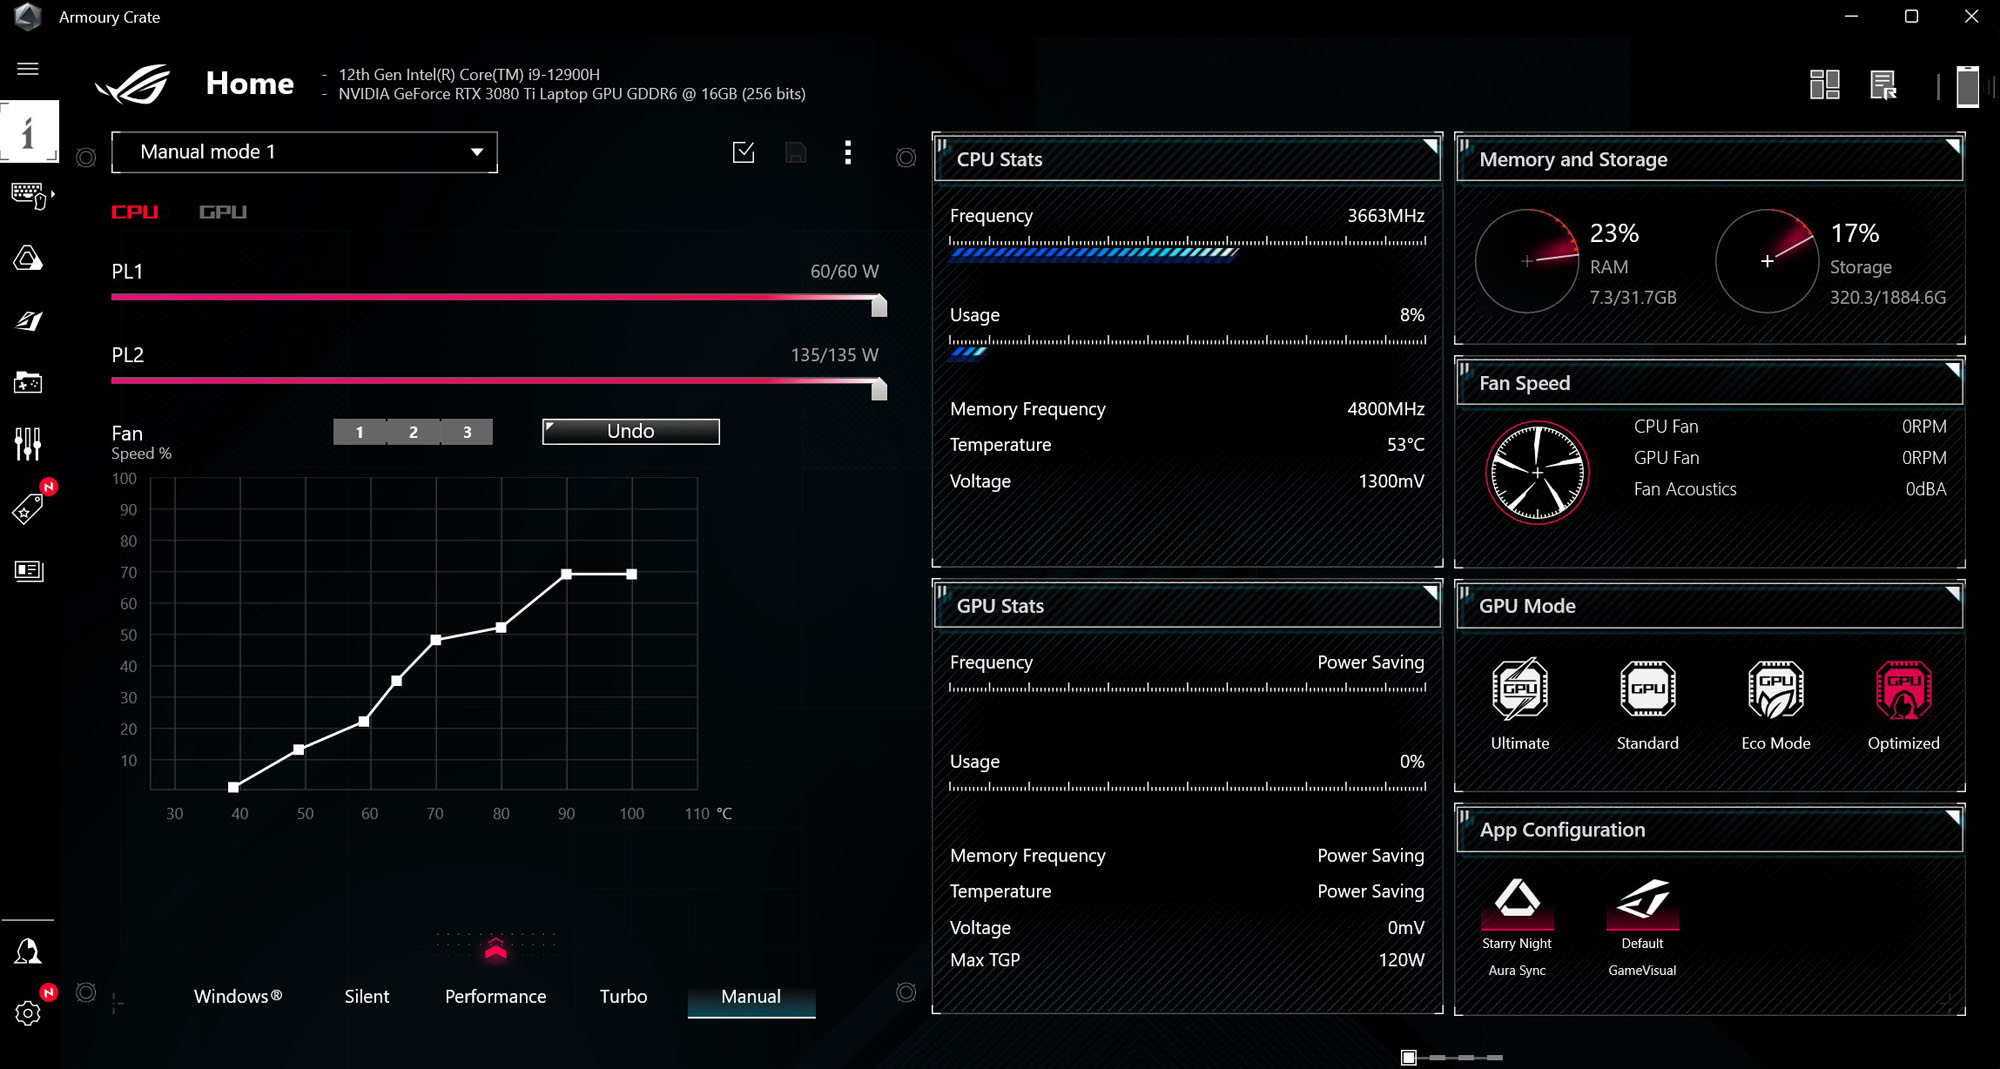 A screenshot of Armoury Crate's manual mode, showing CPU power sliders.